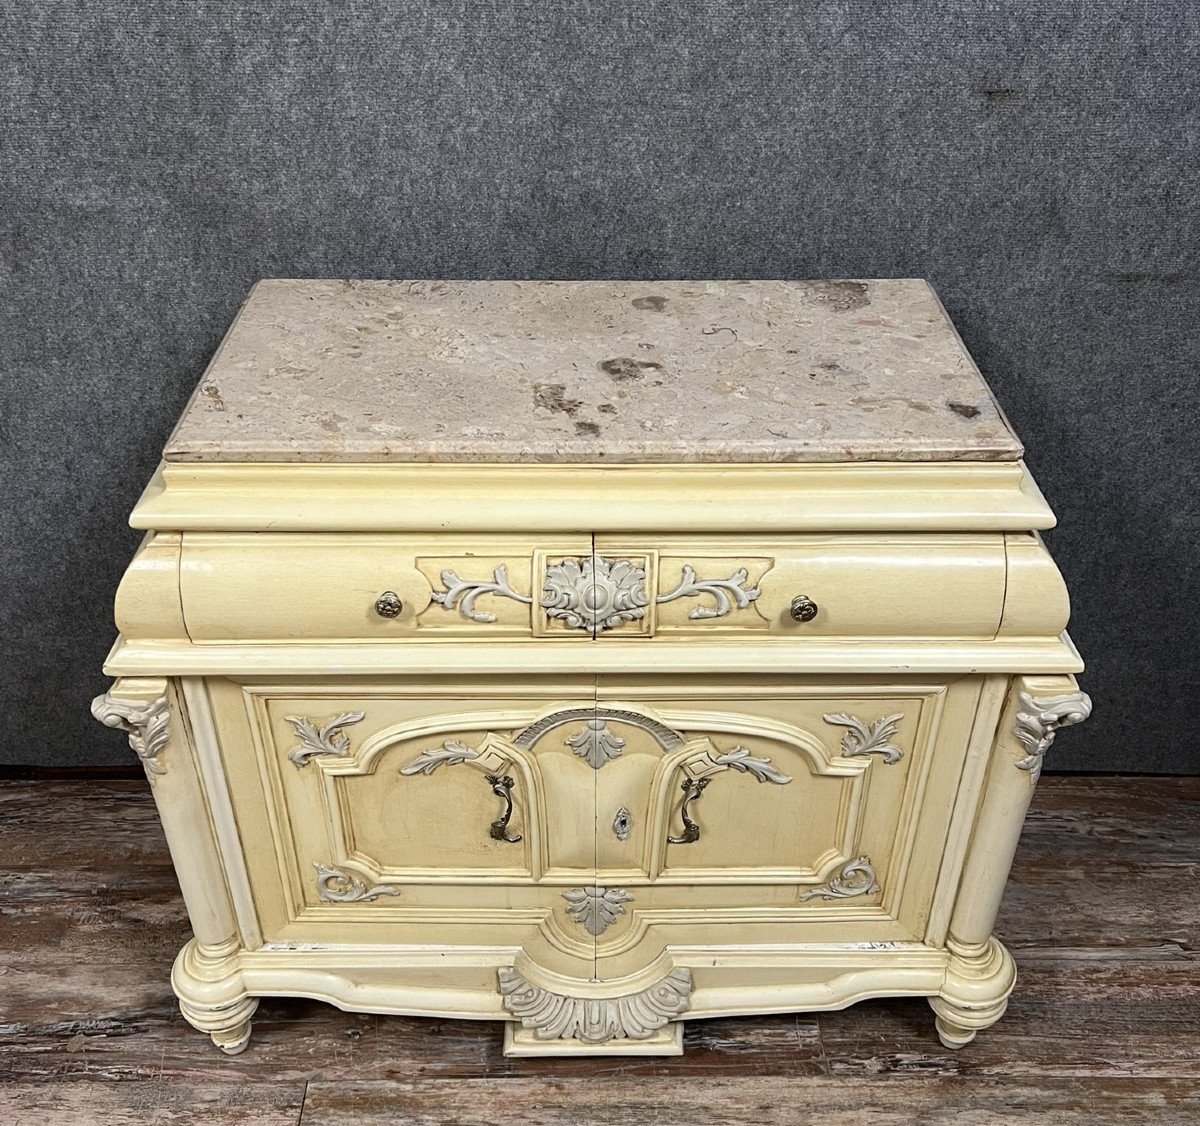 Atypical Venetian Baroque Commode With Doors In Lacquered Wood-photo-1